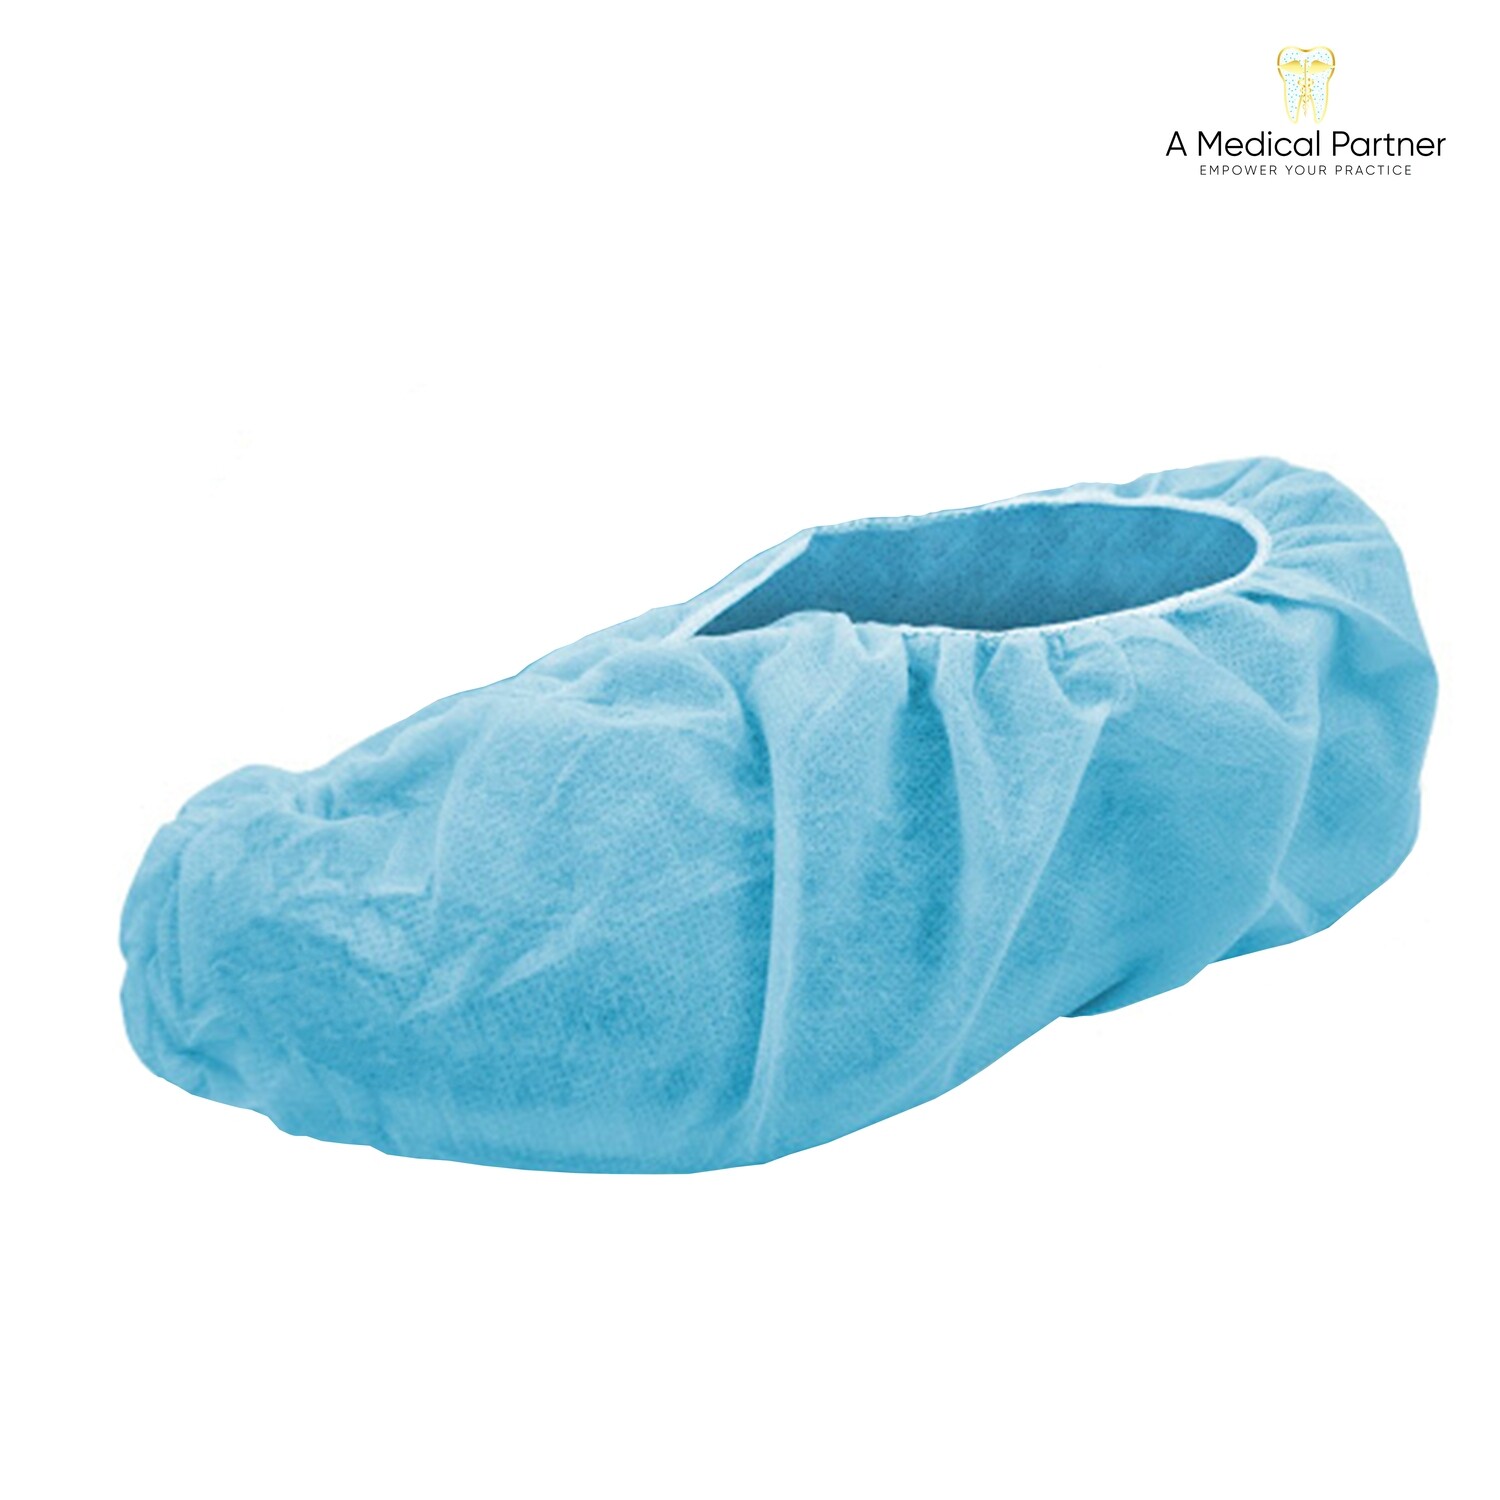 AMP Shoe Covers Non Skid Bottom - Case of 900 Shoe Covers ($0.14 / $0.15 Per Pair)